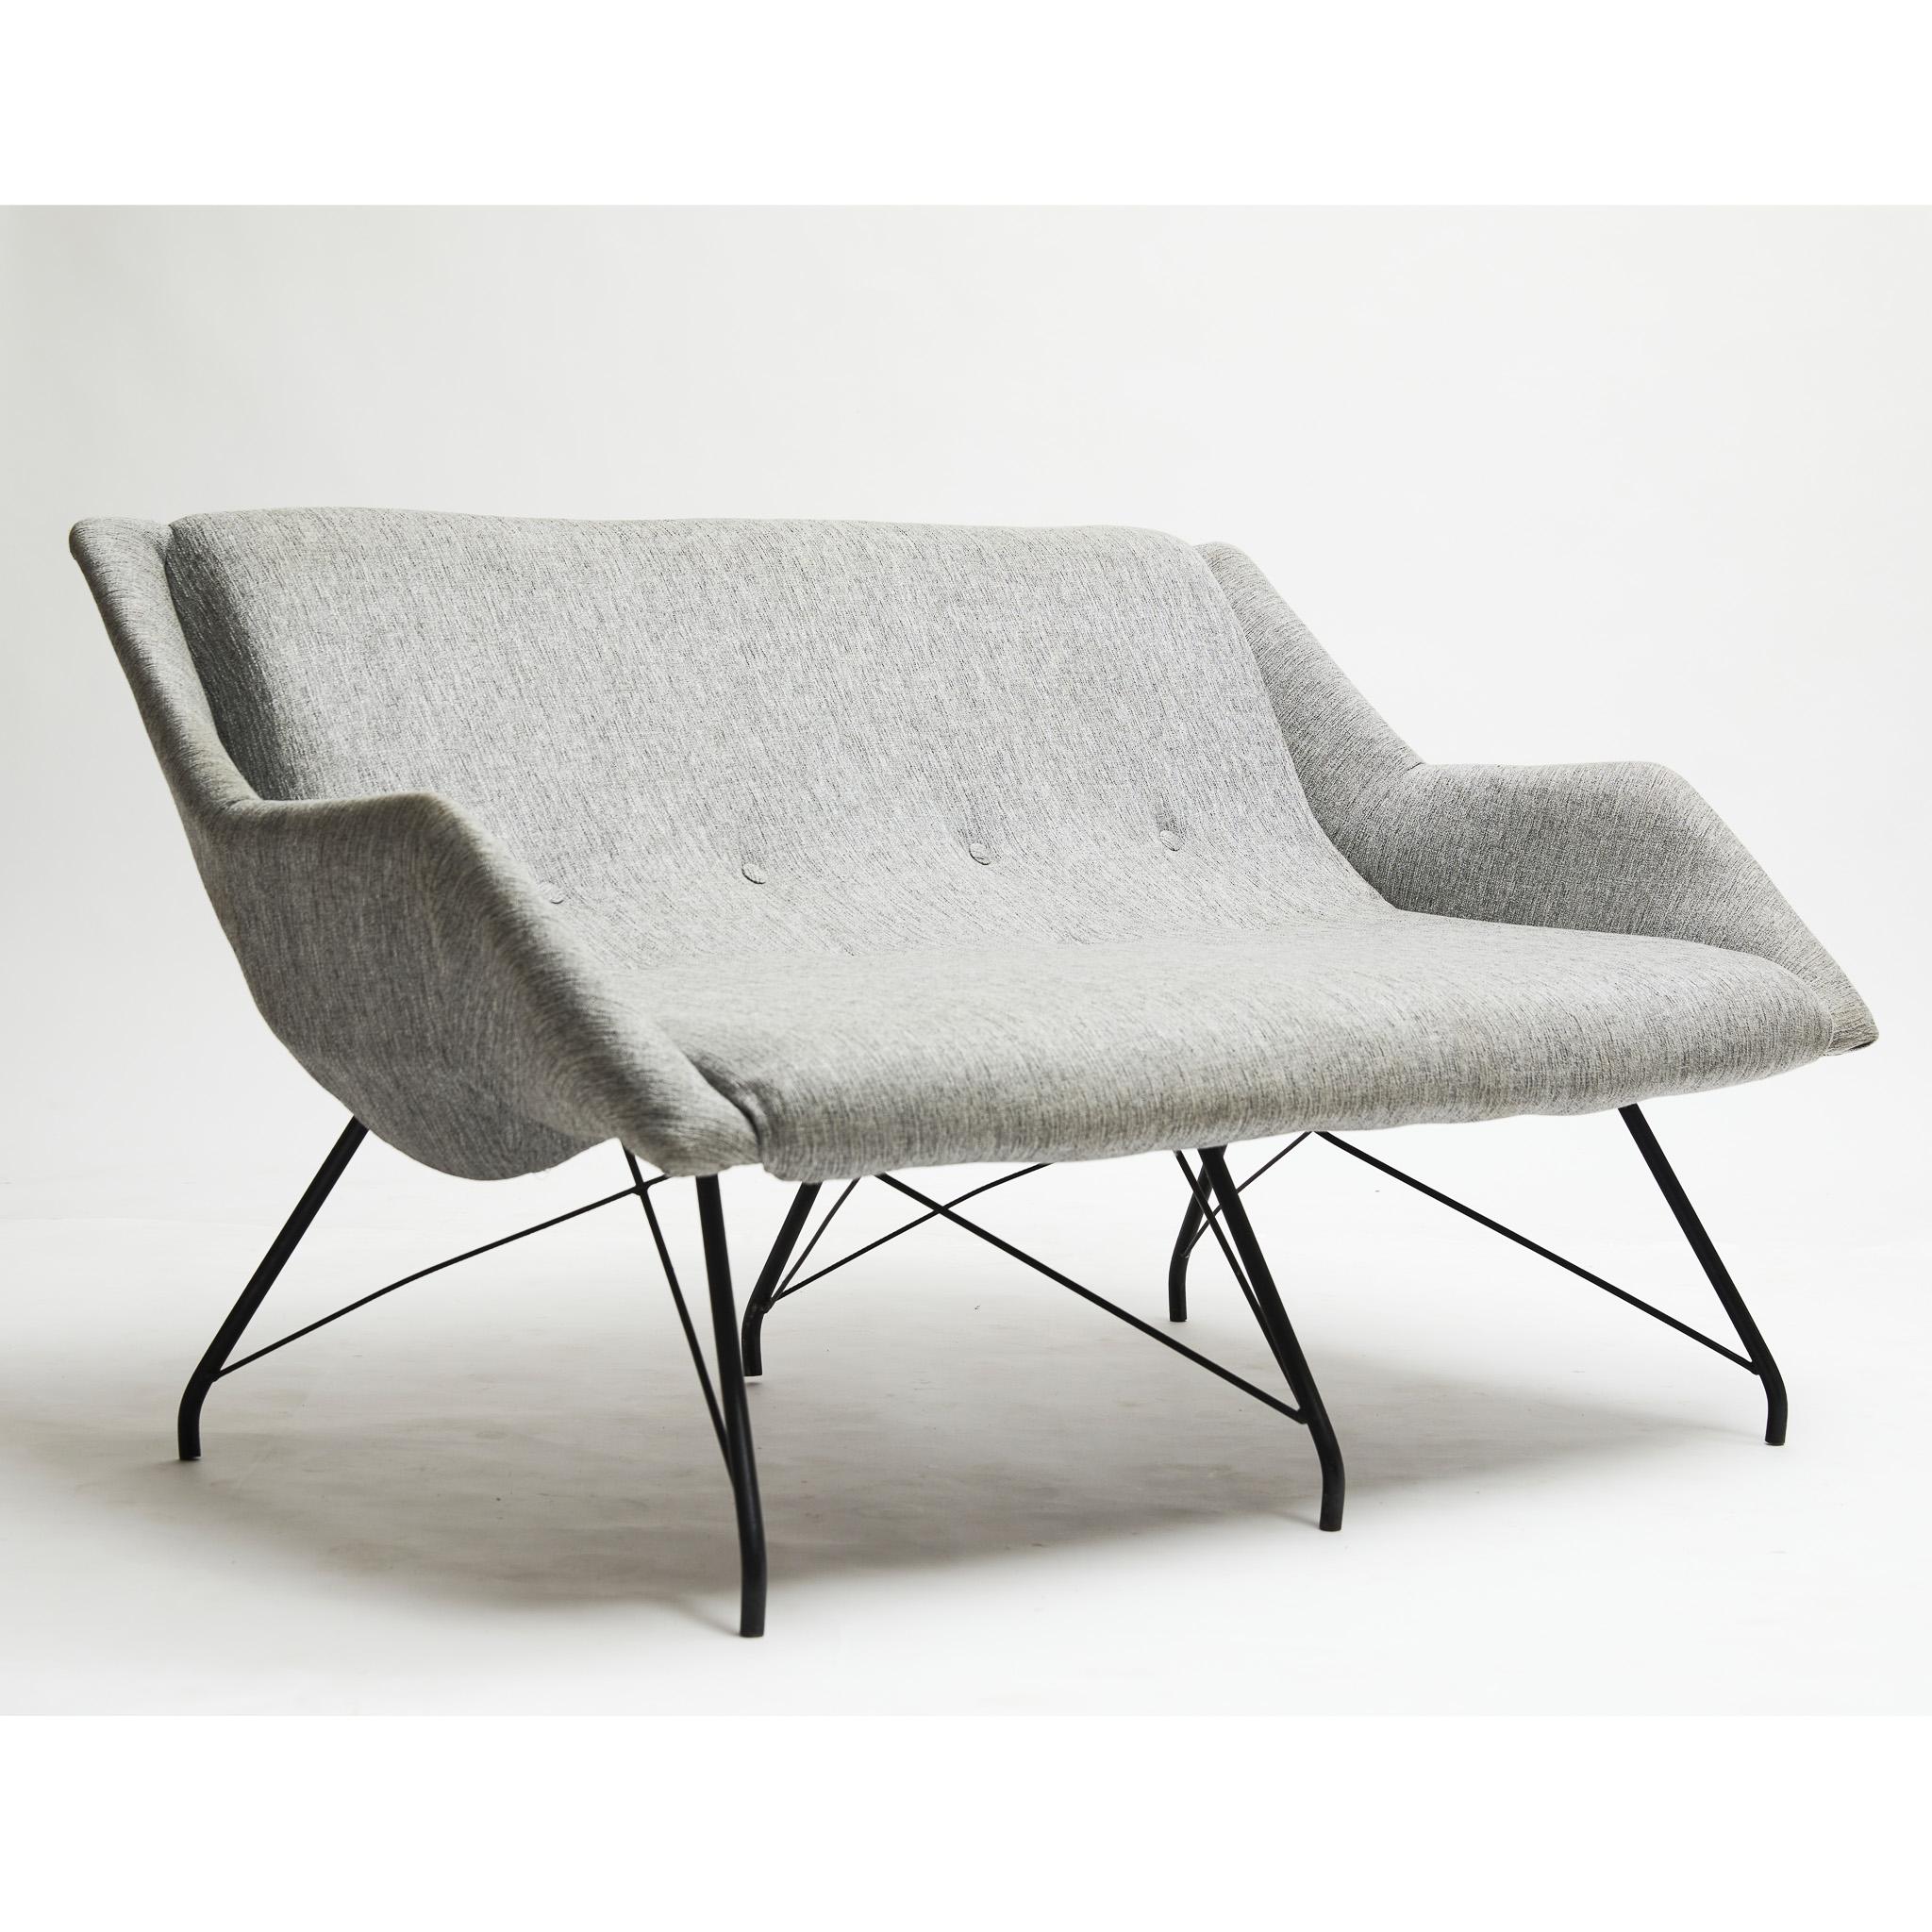 Mid-Century Modern Loveseat in Iron & Grey Fabric by Carlo Hauner, Brazil 1955 For Sale